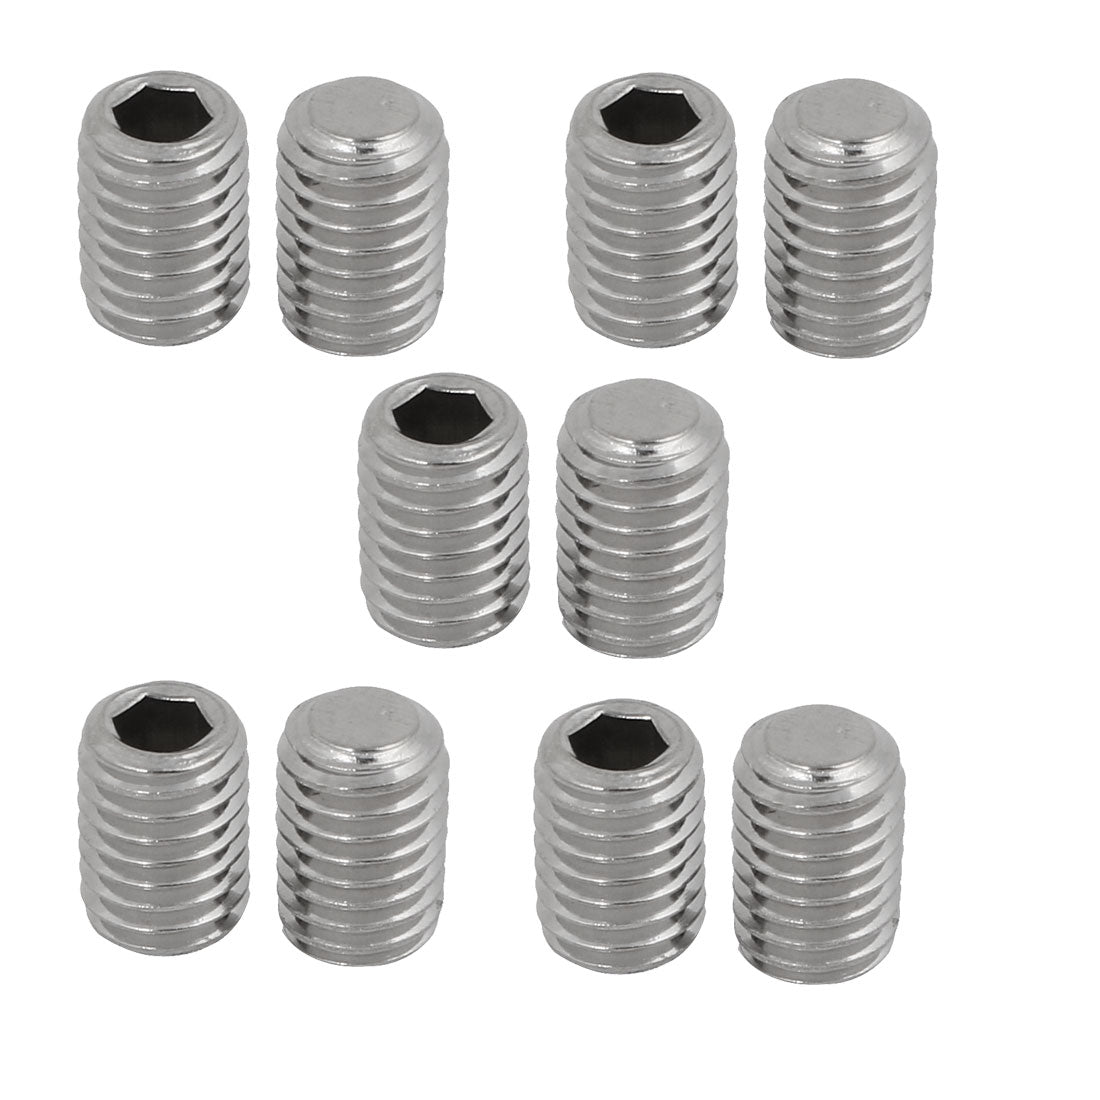 uxcell Uxcell 10 Pcs M8 x 12mm 304 Stainless Steel Hex Socket Drive Flat Point Grub Screw